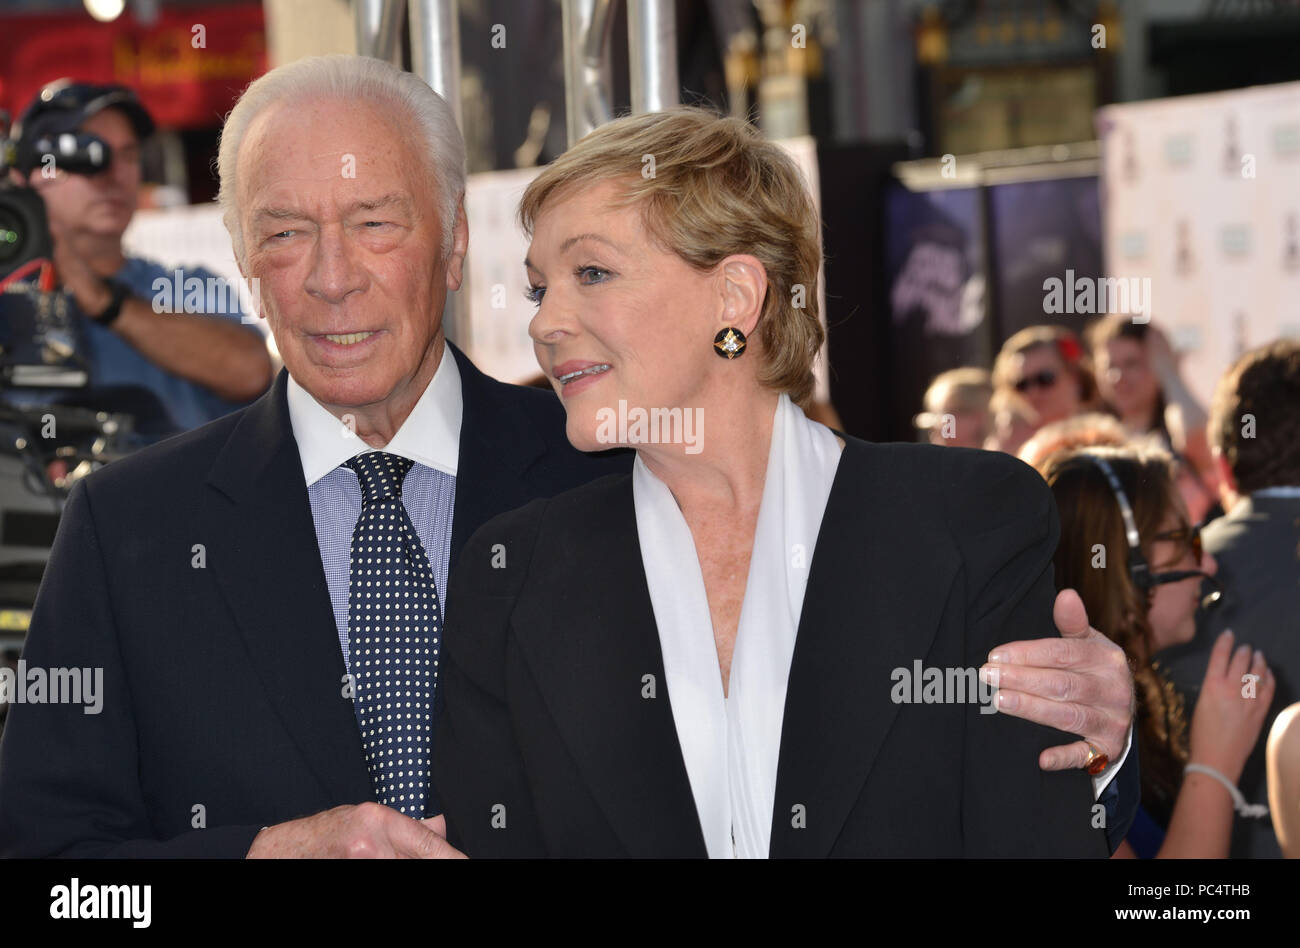 Christopher Plummer,  Julie Andrews 008 at The Sound Of Music Premiere at the TCL Chinese Theatre in Los Angeles. March 26, 2015.Christopher Plummer,  Julie Andrews 008  Event in Hollywood Life - California, Red Carpet Event, USA, Film Industry, Celebrities, Photography, Bestof, Arts Culture and Entertainment, Topix Celebrities fashion, Best of, Hollywood Life, Event in Hollywood Life - California, Red Carpet and backstage, movie celebrities, TV celebrities, Music celebrities, Arts Culture and Entertainment, vertical, one person, Photography,    inquiry tsuni@Gamma-USA.com , Credit Tsuni / USA Stock Photo